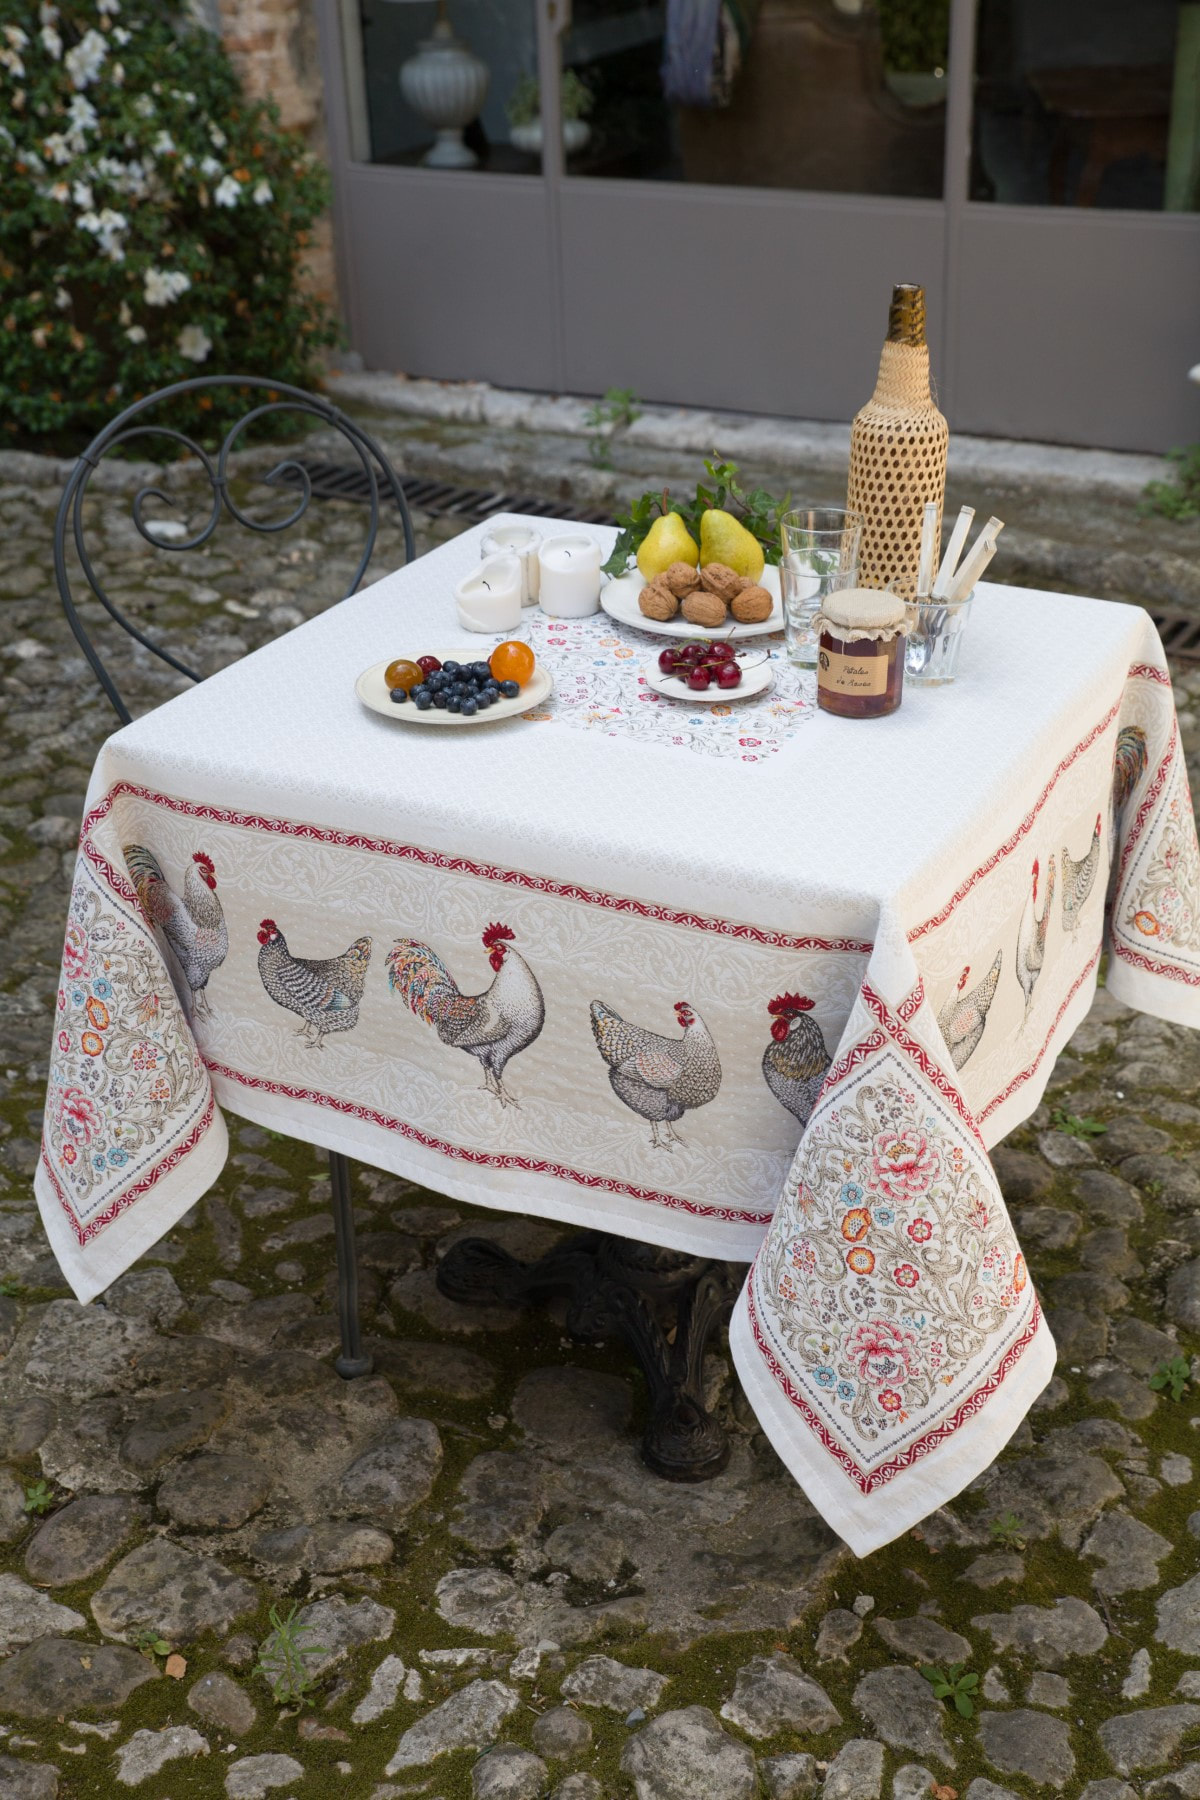 Heavy Provencal Jacquard Woven Tablecloth Lafayette Chickens 56 1/2 X 56  France 